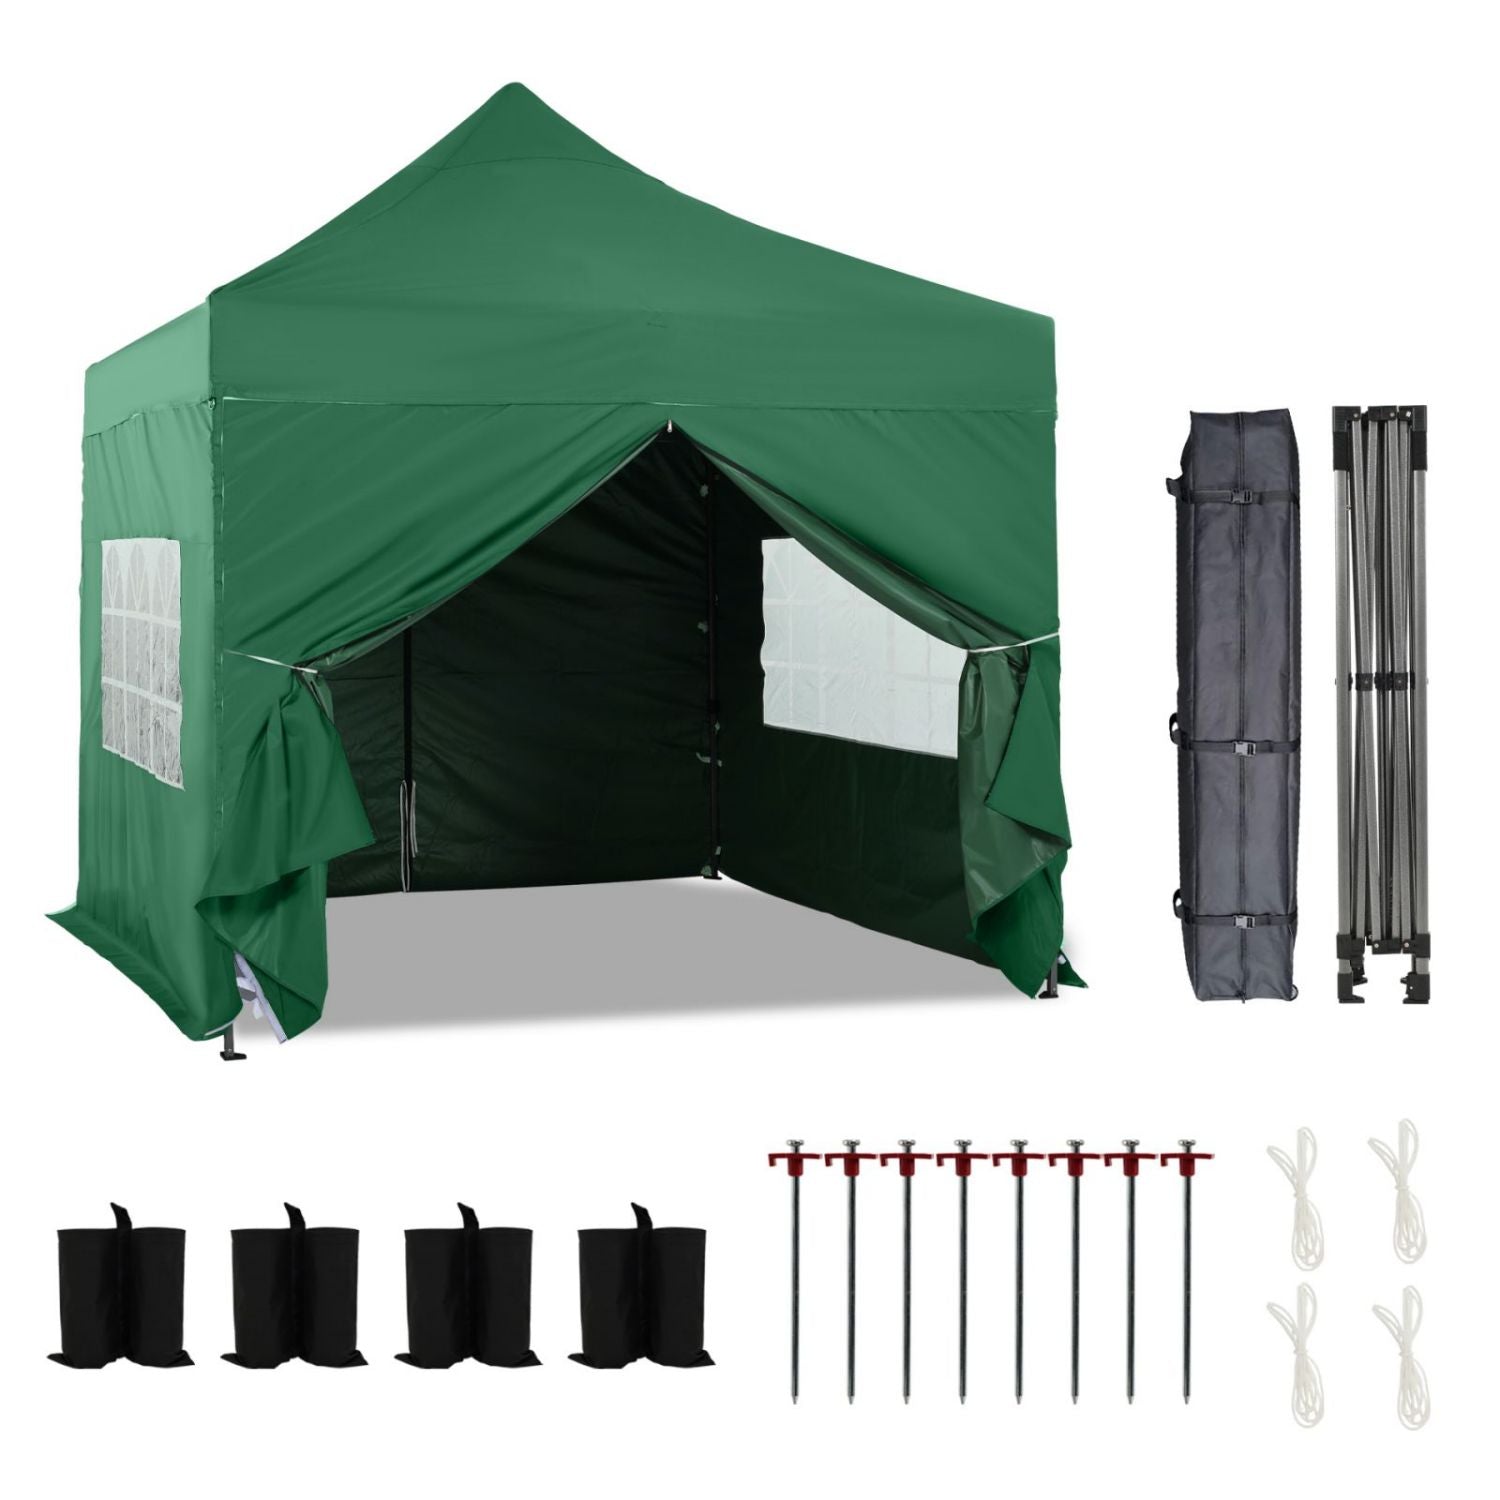 10 x 10 FT. Pop Up Canopy Tent with Windows Sidewalls, 3 Adjustable Heights, with Wheeled Bag  Aoodor  Green  